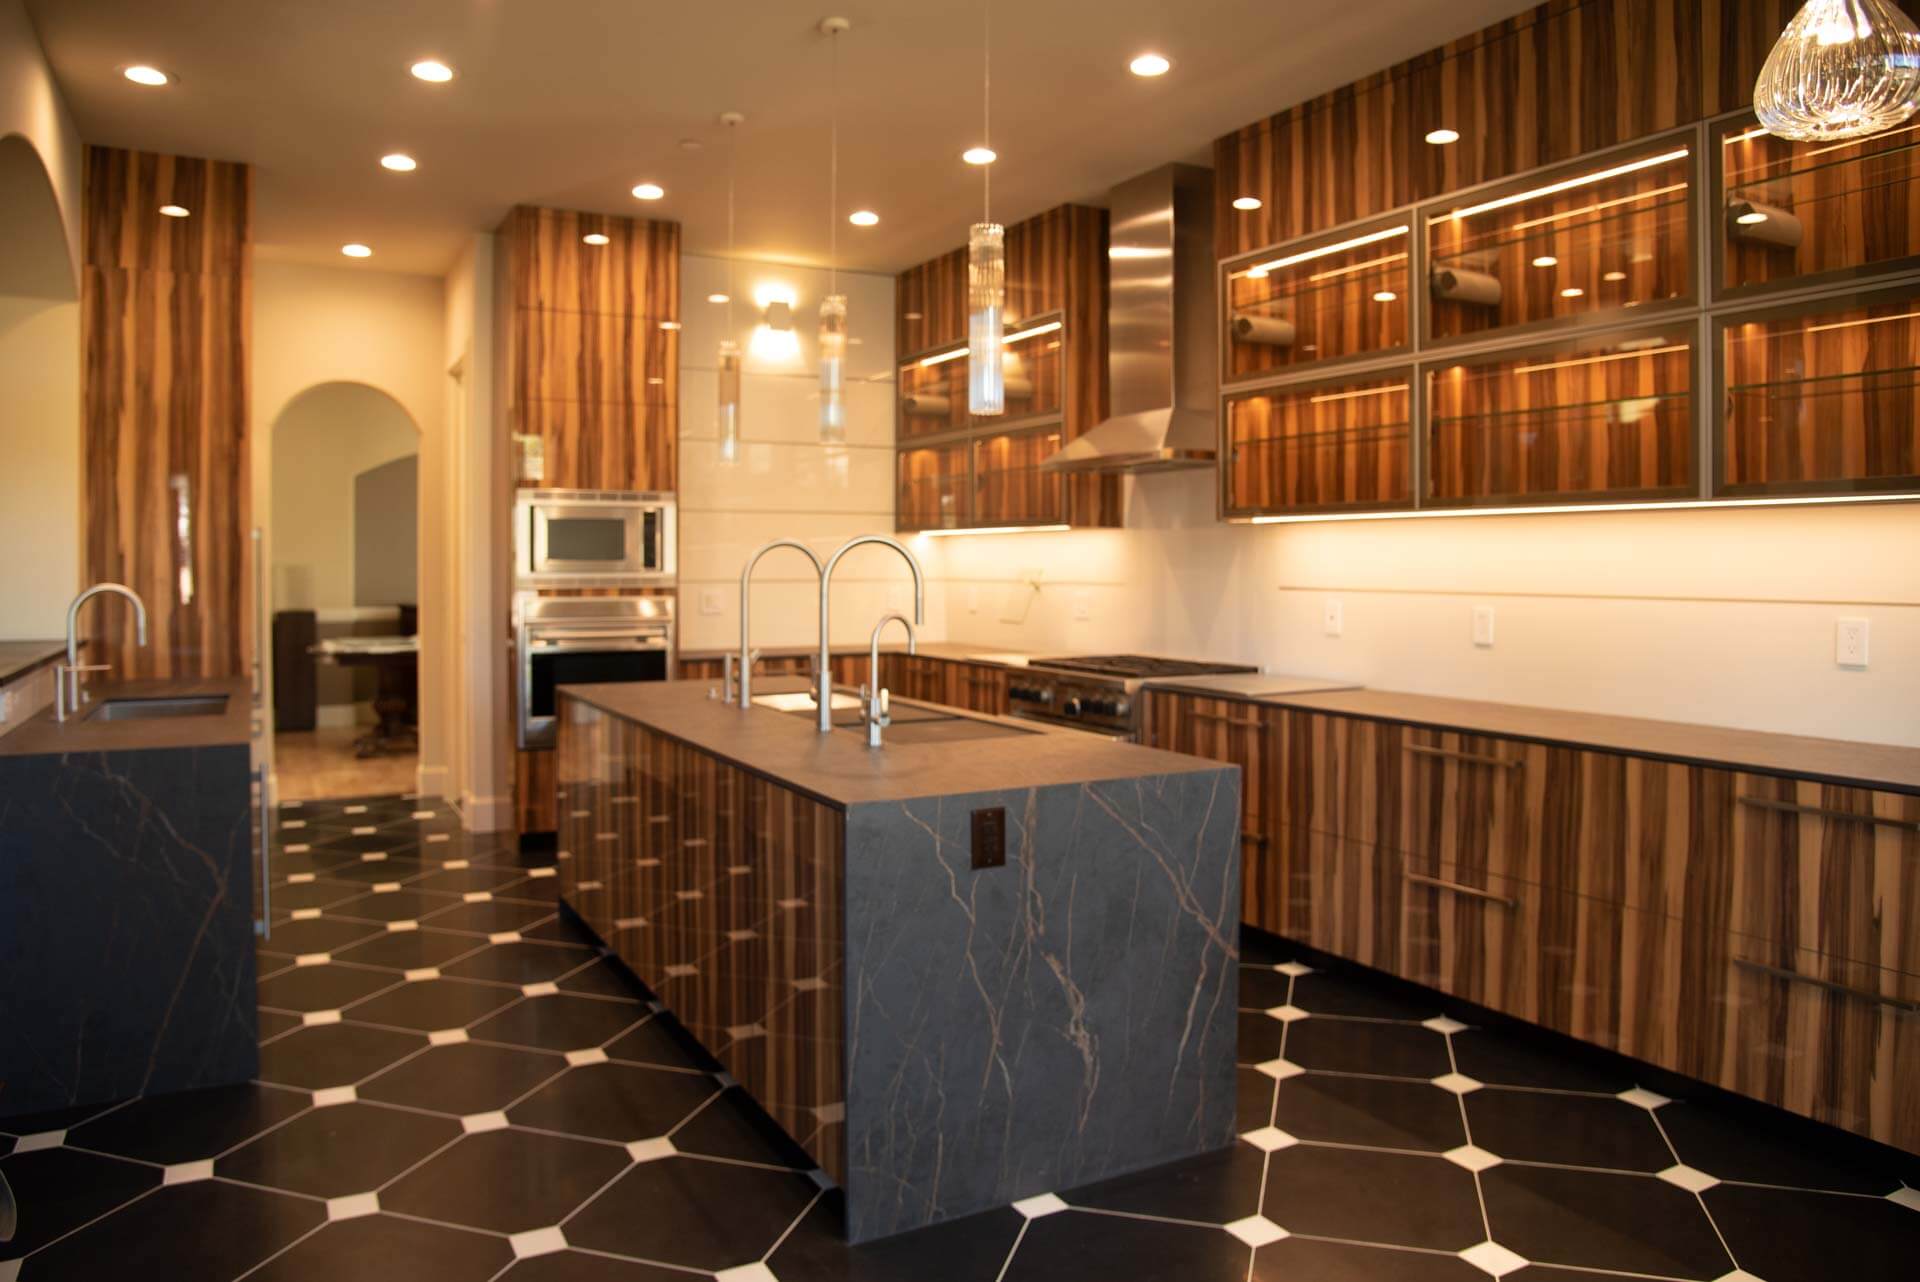 Creating a Contemporary Kitchen - Remodeling Made Easy